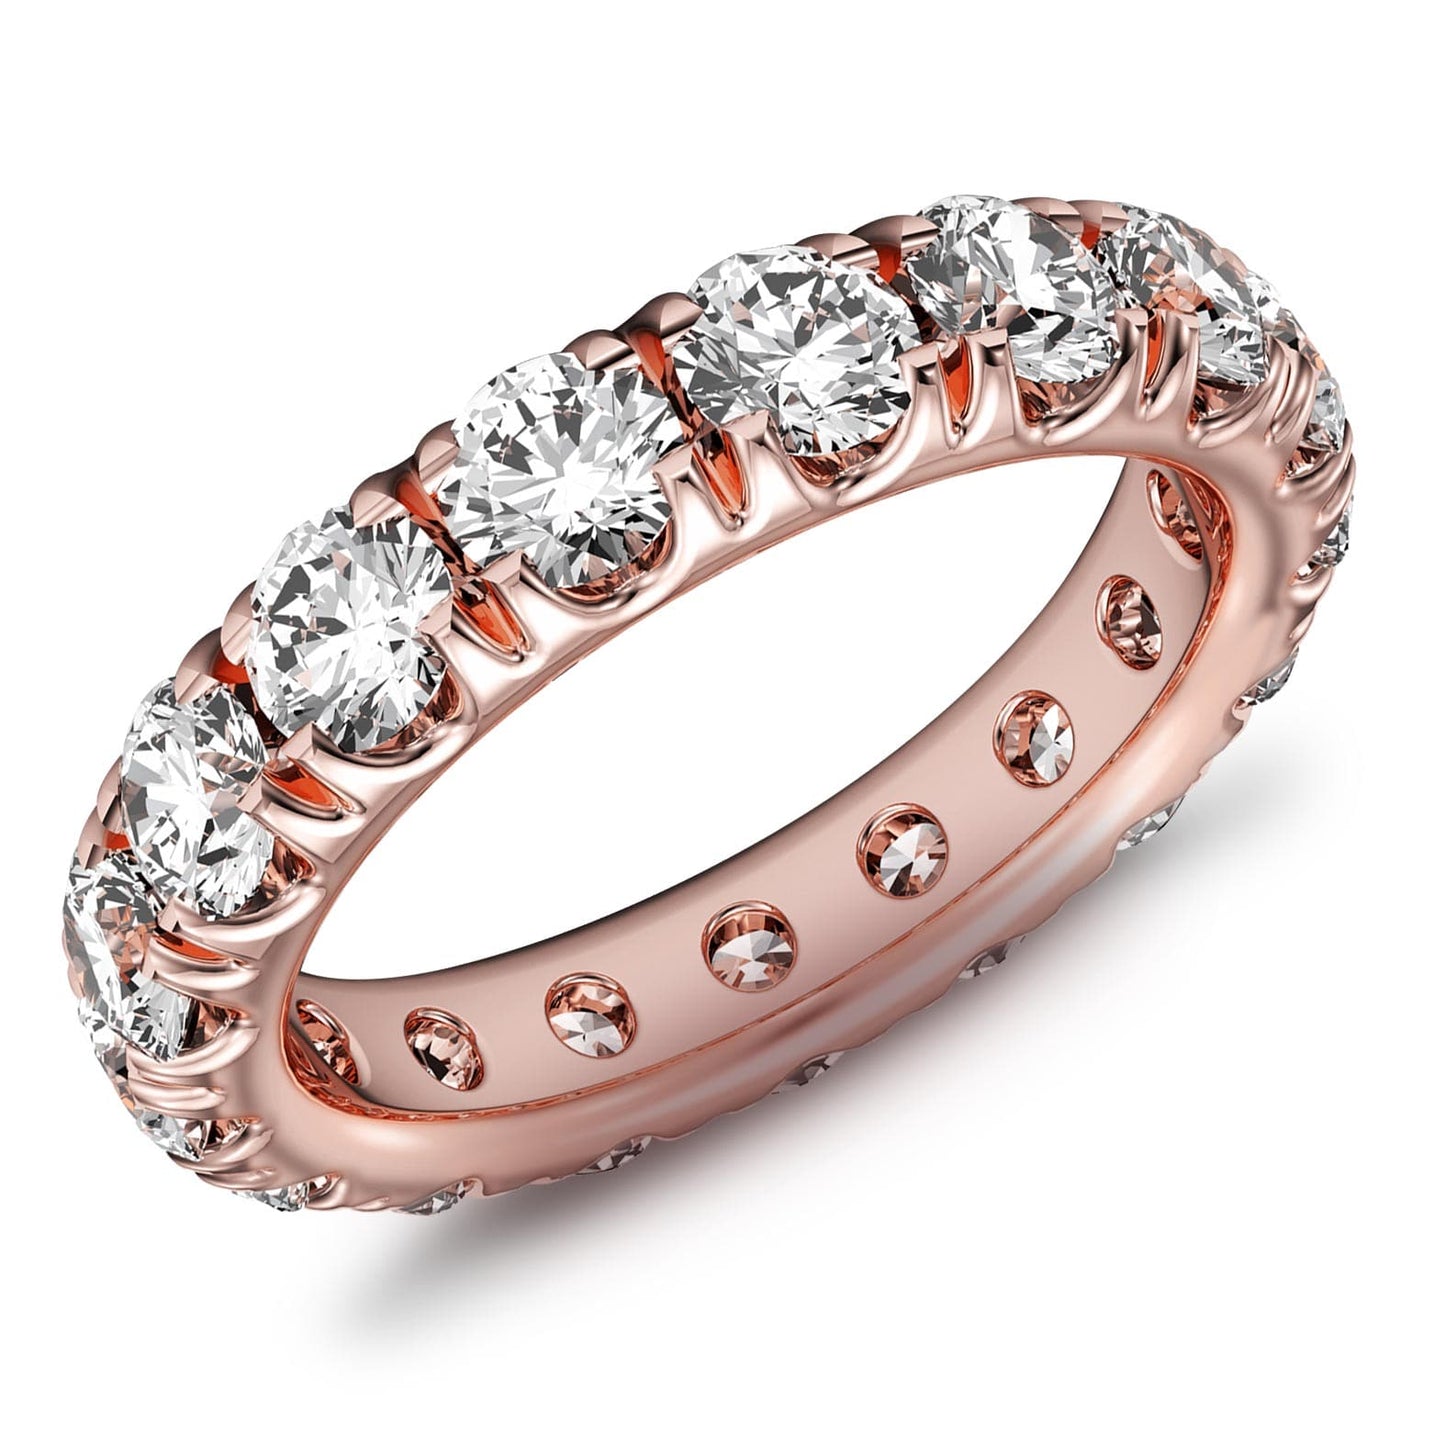 3ct French Pave Diamond Eternity Ring in 14k Gold